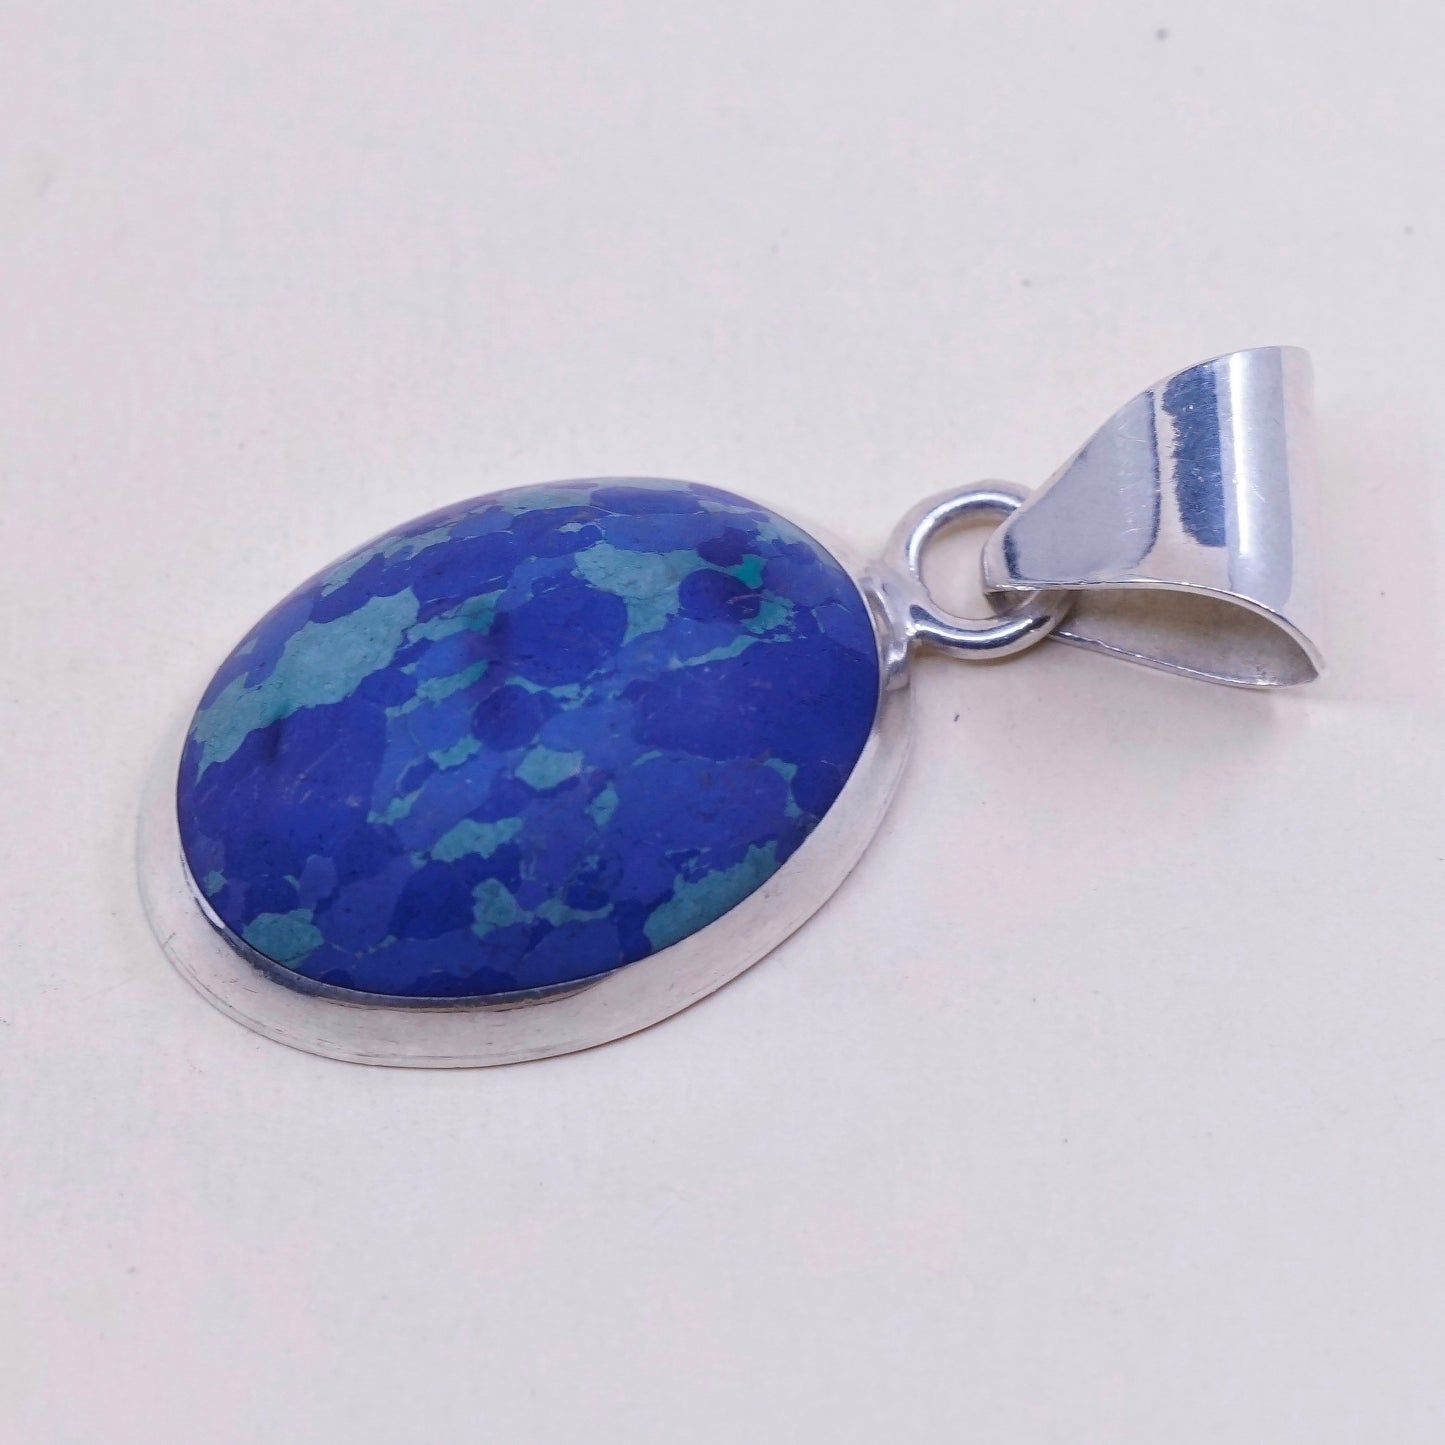 Vintage handmade sterling silver charm, mexico 925 with oval azurite